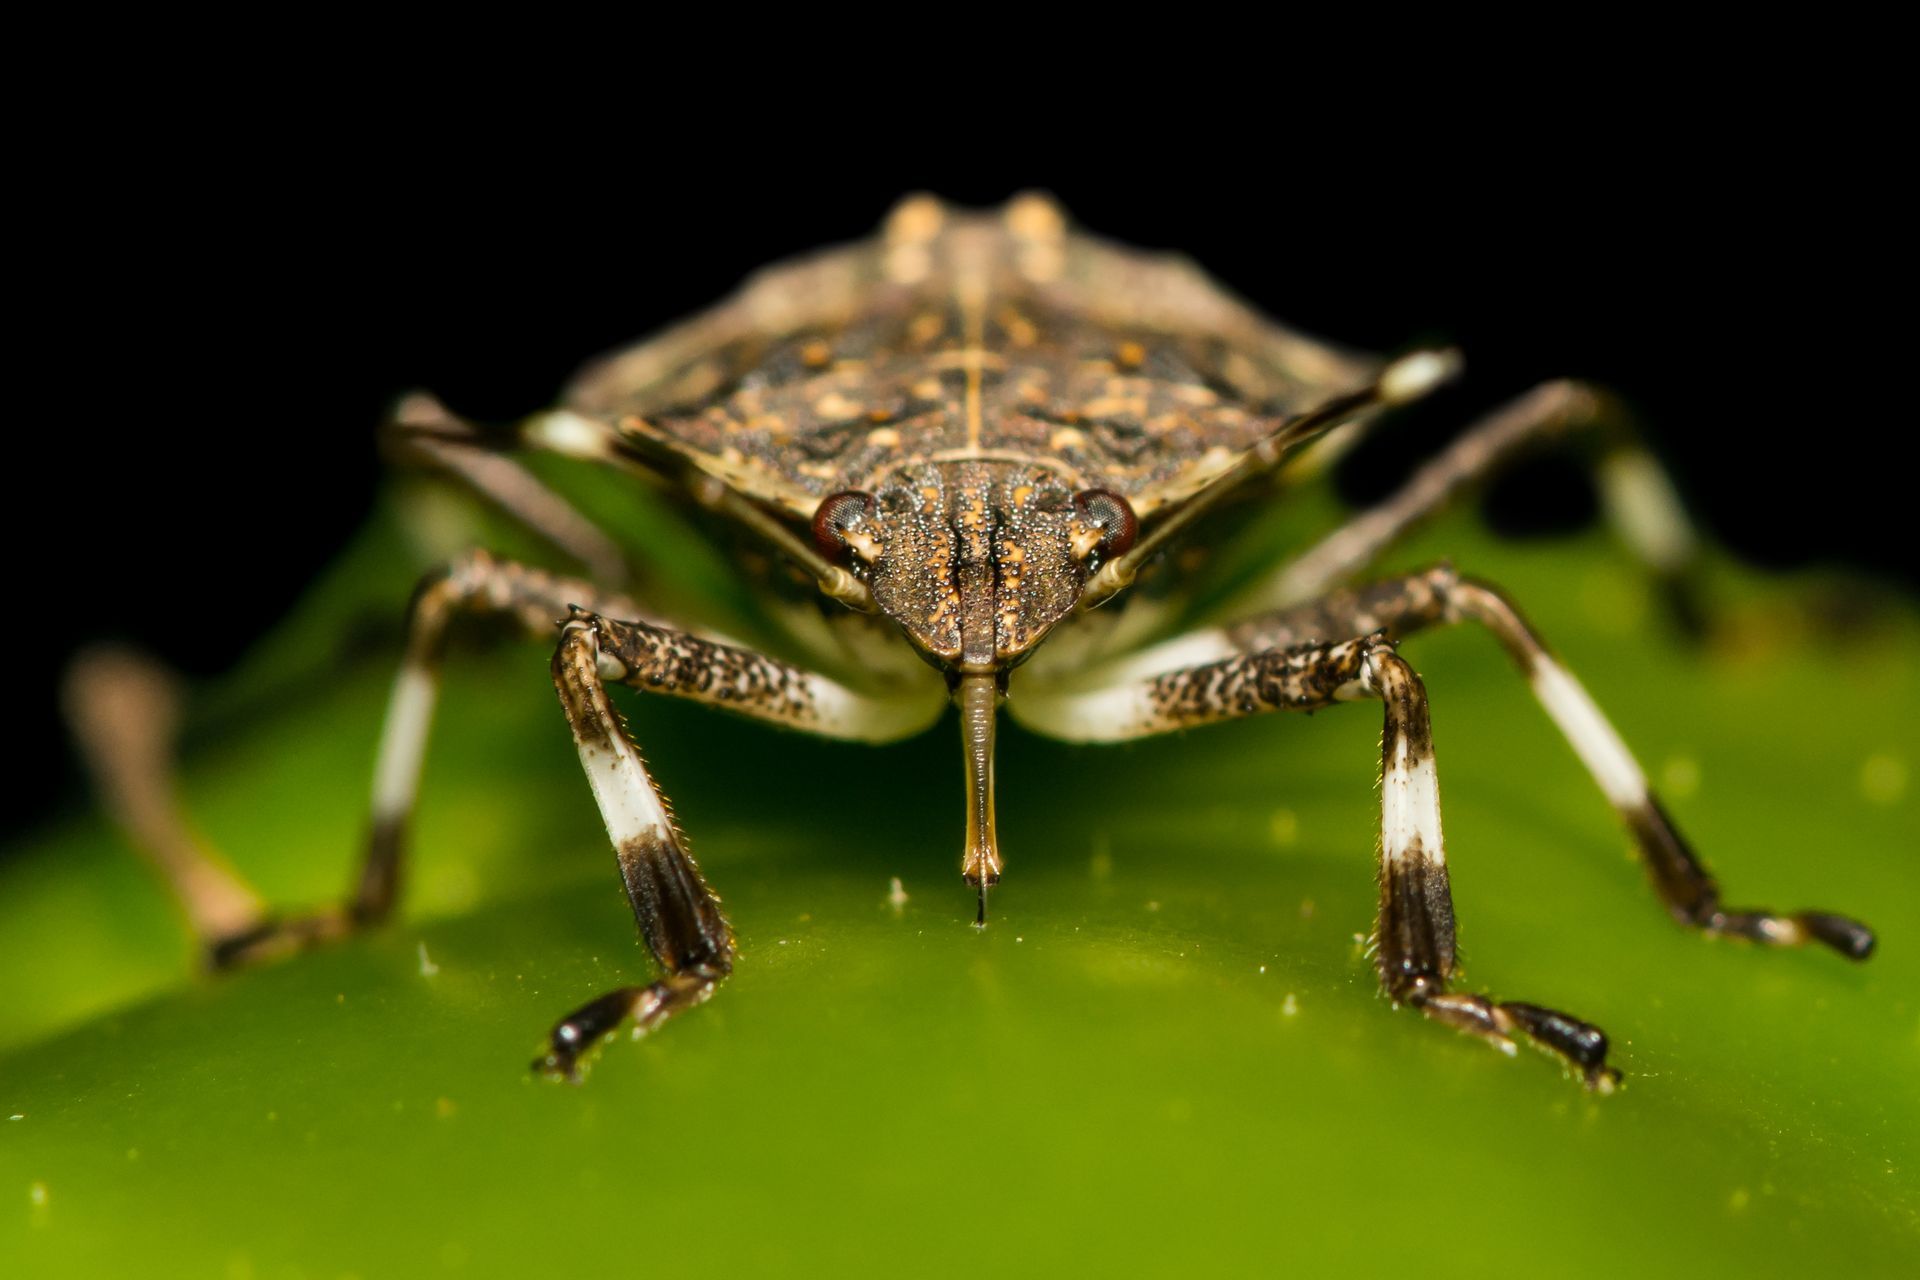 image of a stink bug eating